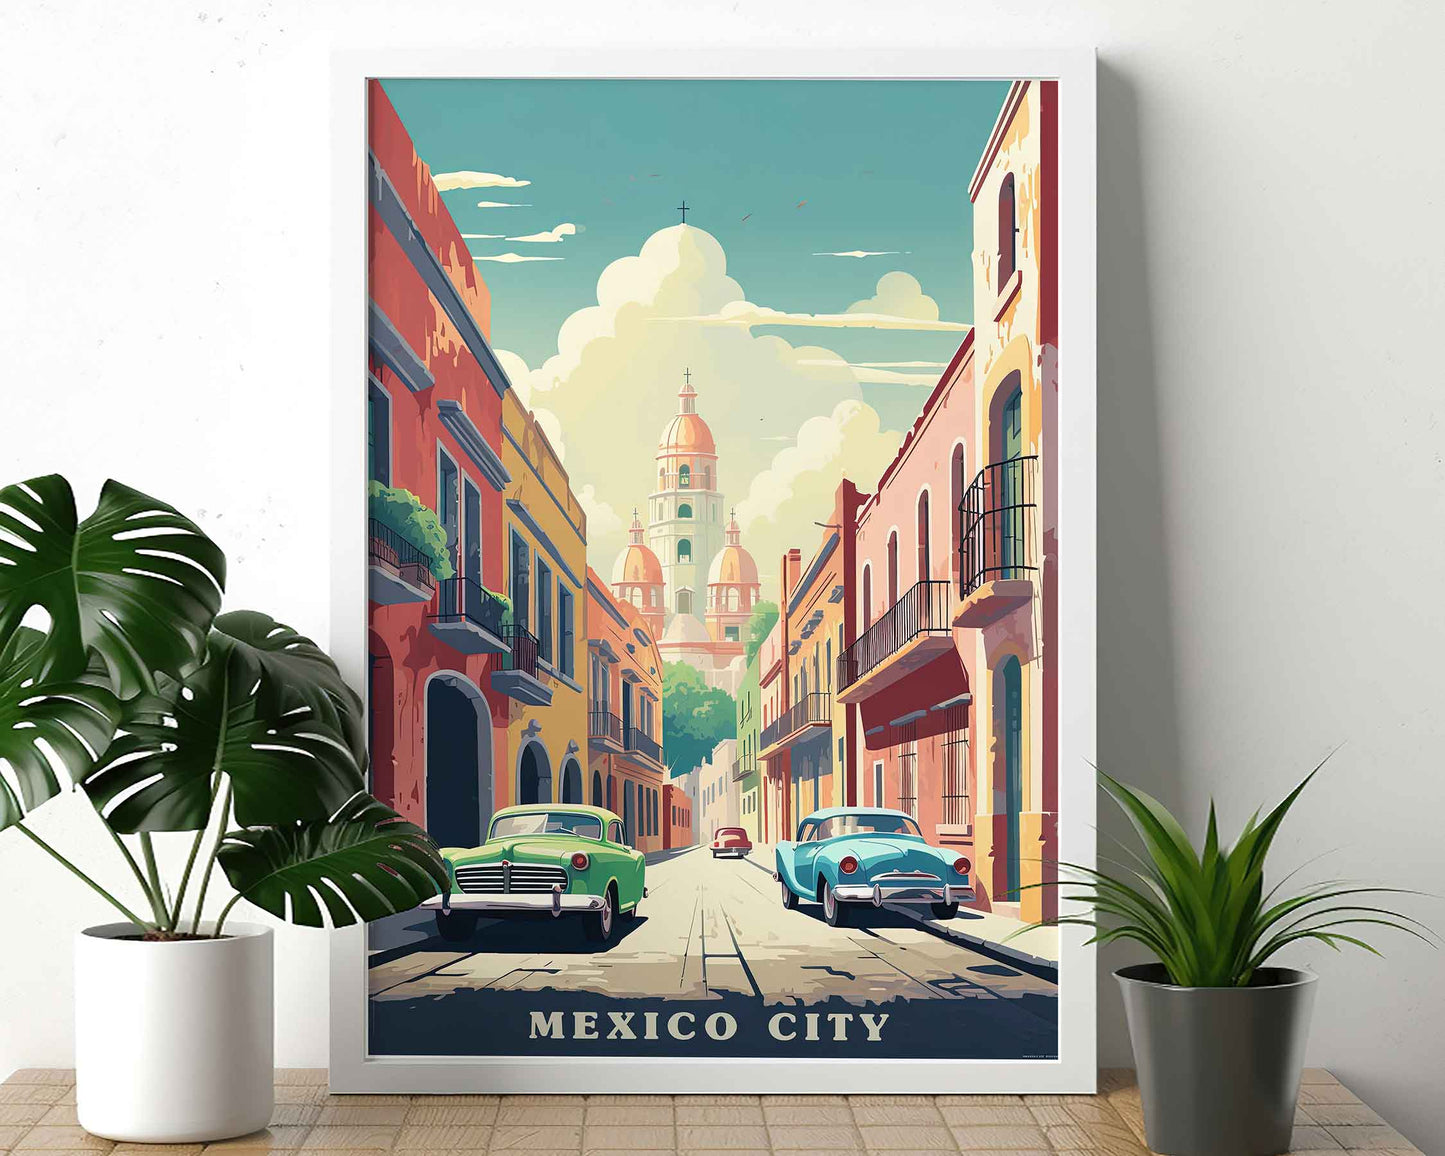 Framed Image of Mexico City Illustration Travel Posters Wall Art Prints